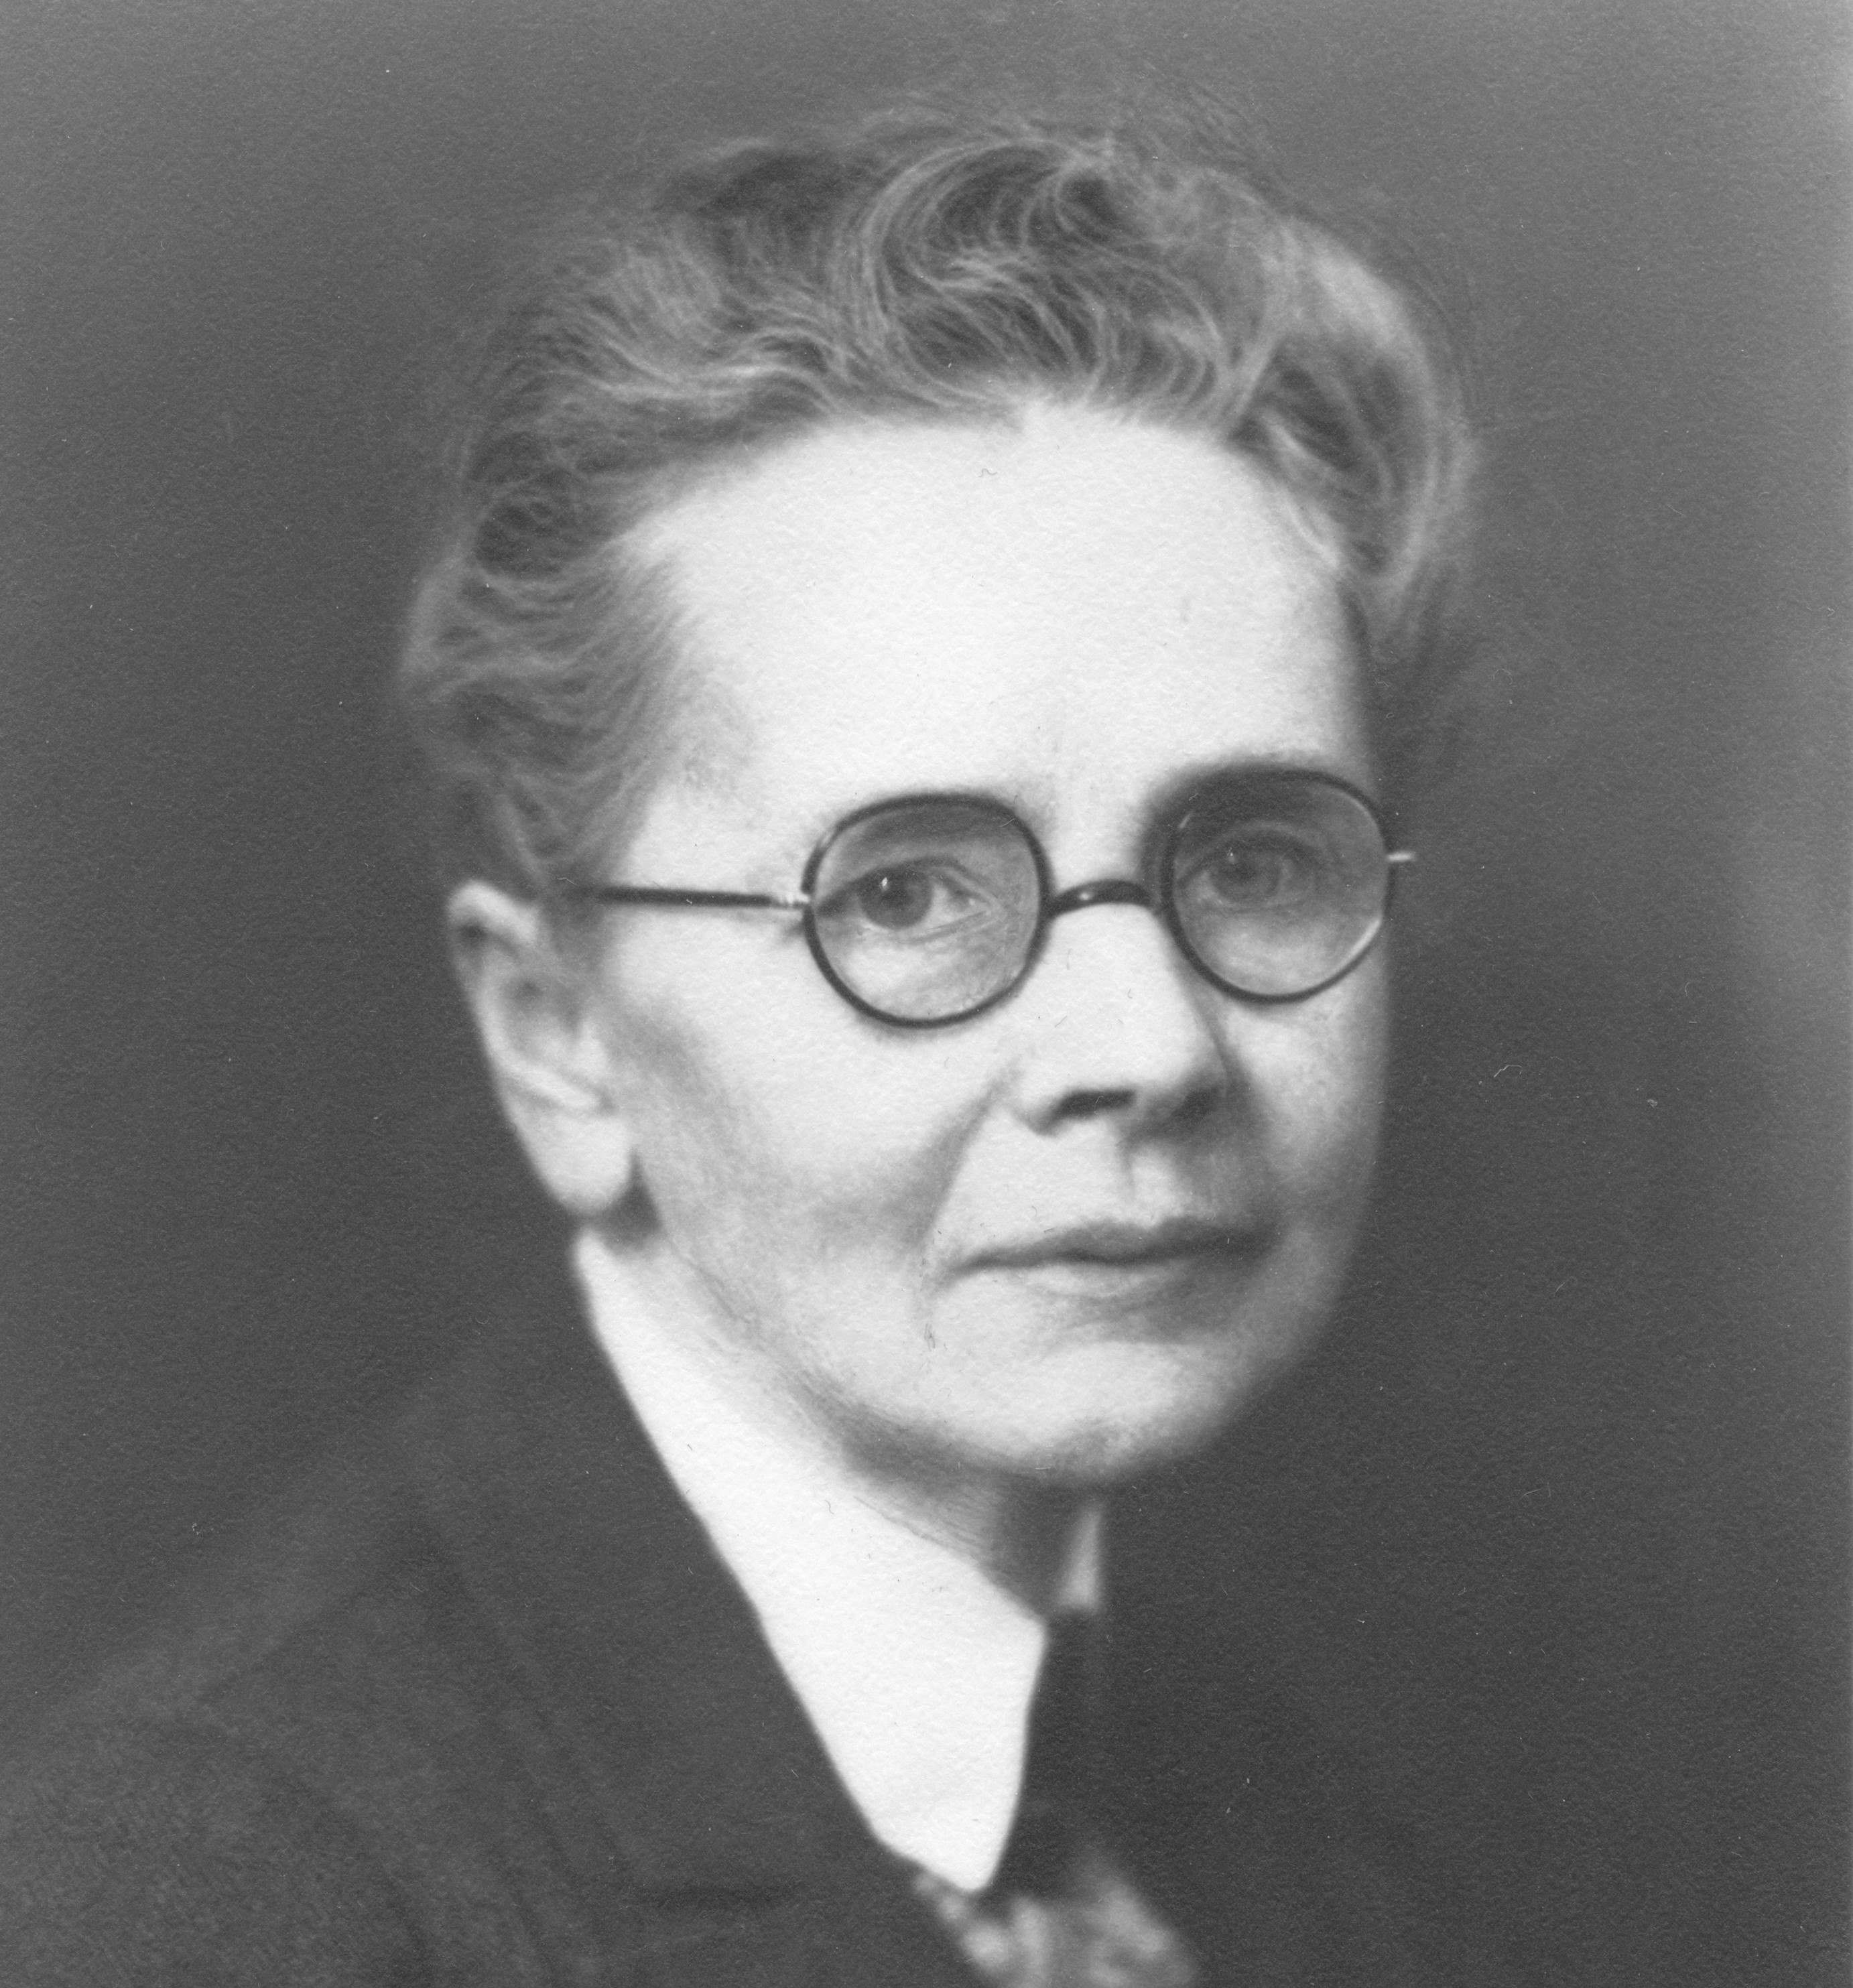 Headshot of Julia Morgan wearing glasses and a suit jacket.